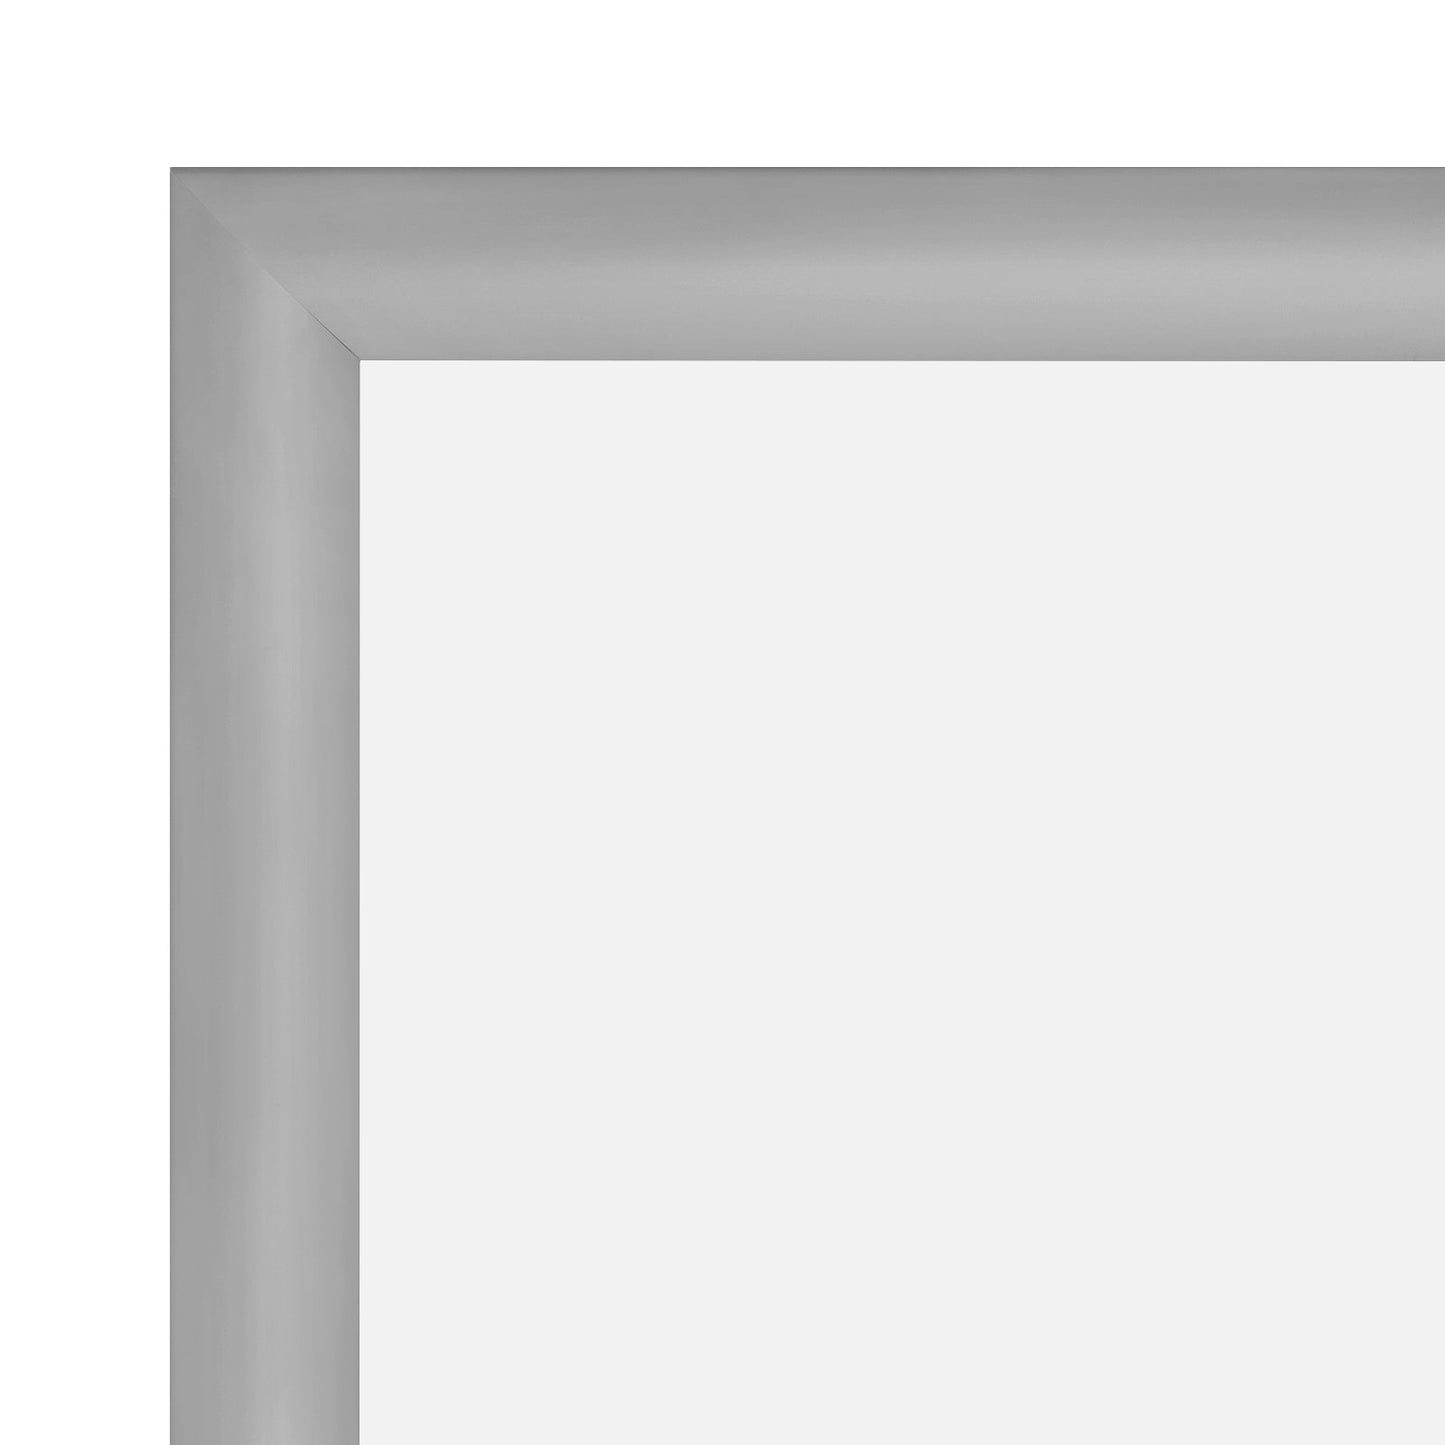 14x22  TRADEframe Silver Snap Frame 14x22 - 1.2 inch profile - Snap Frames Direct